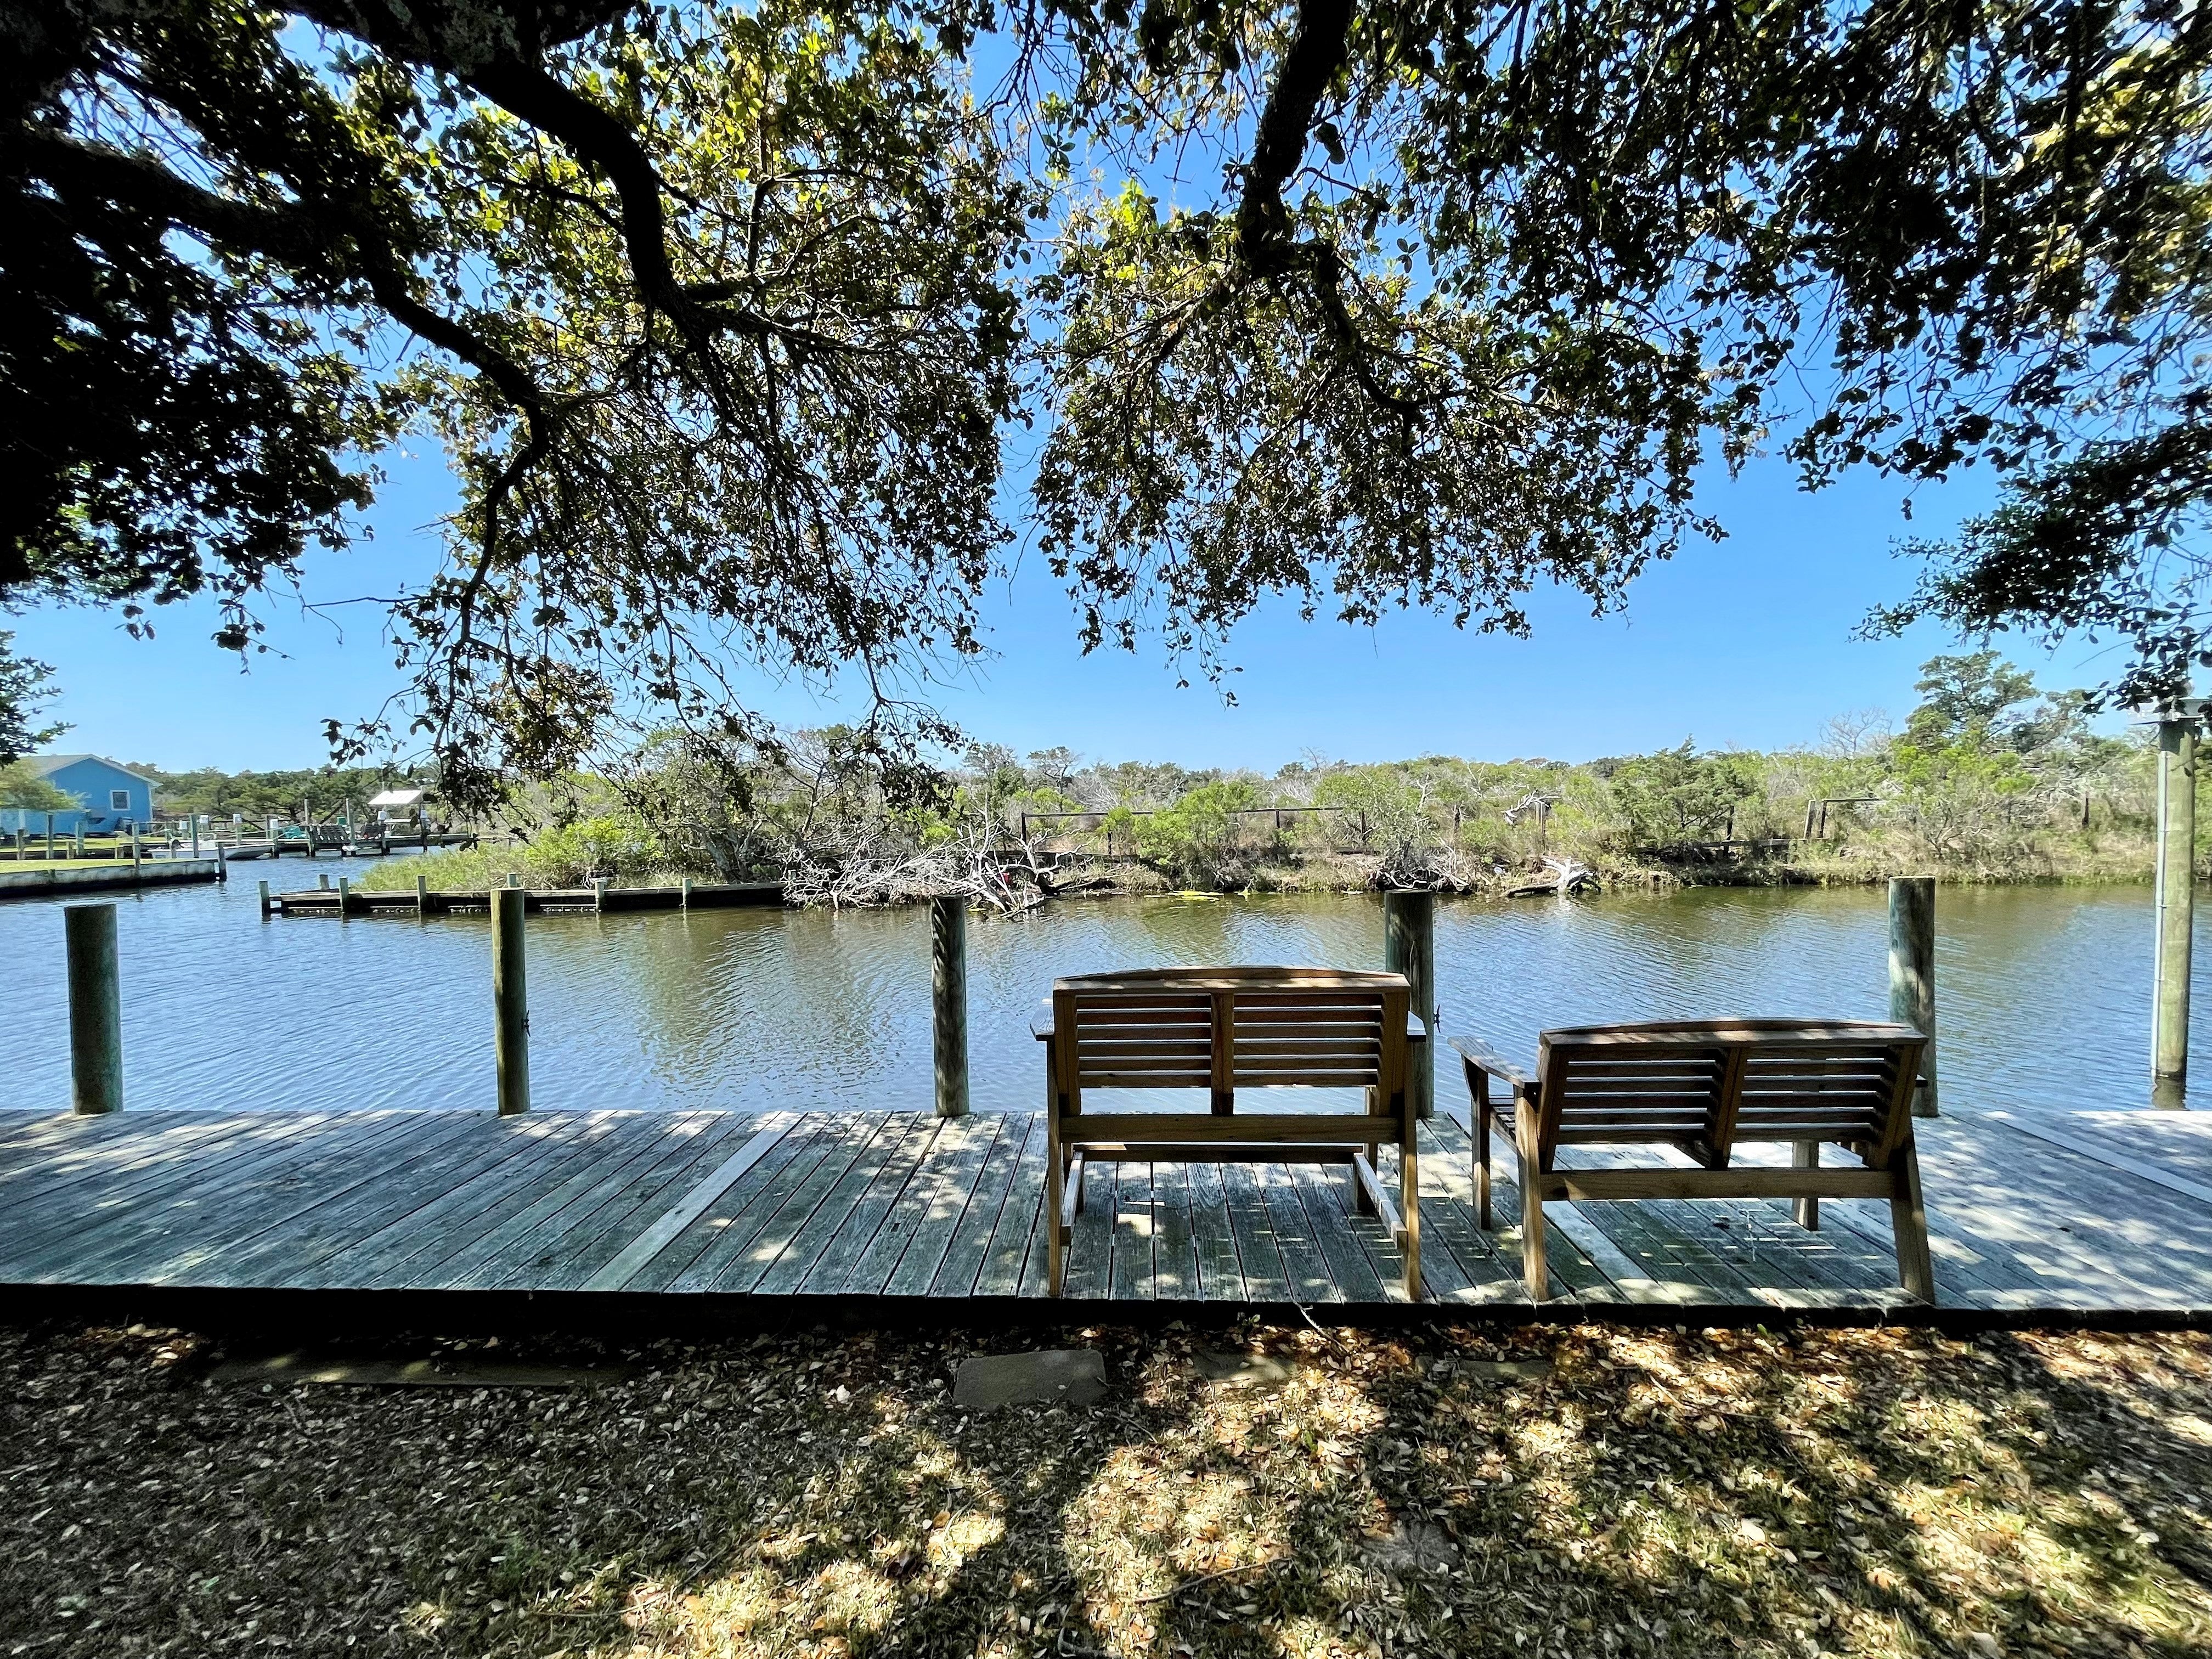 Seating on Dock